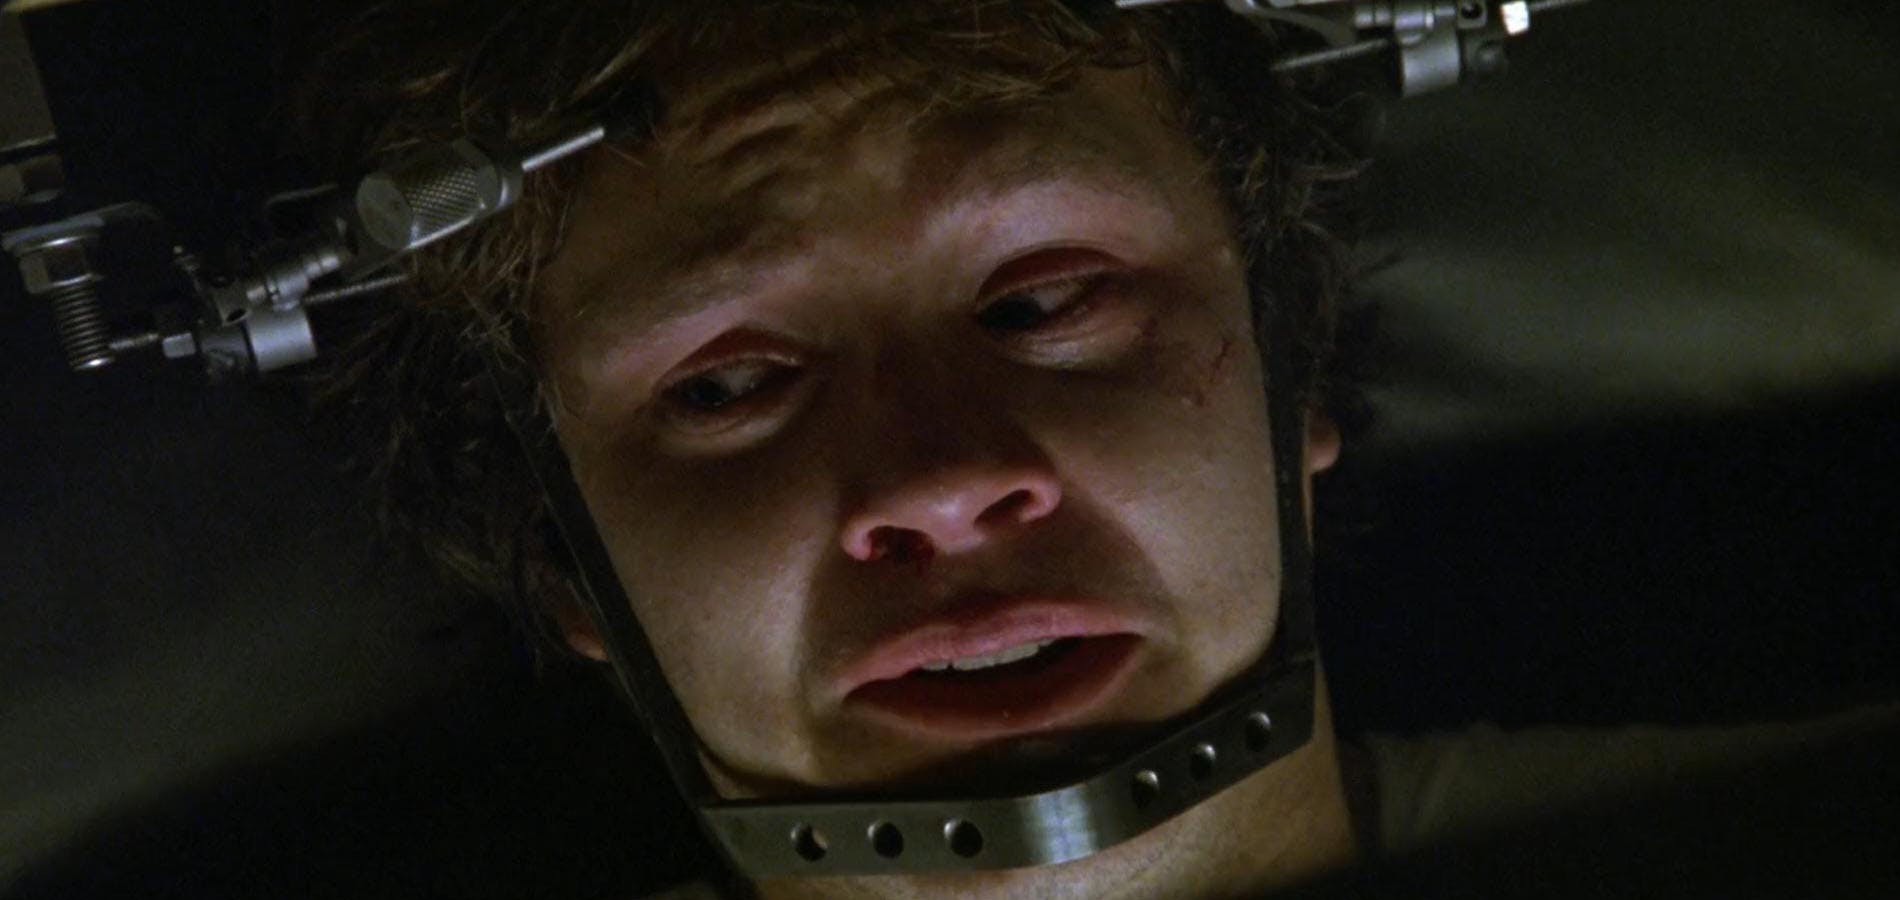 This is a still from the film Jacob's Ladder.